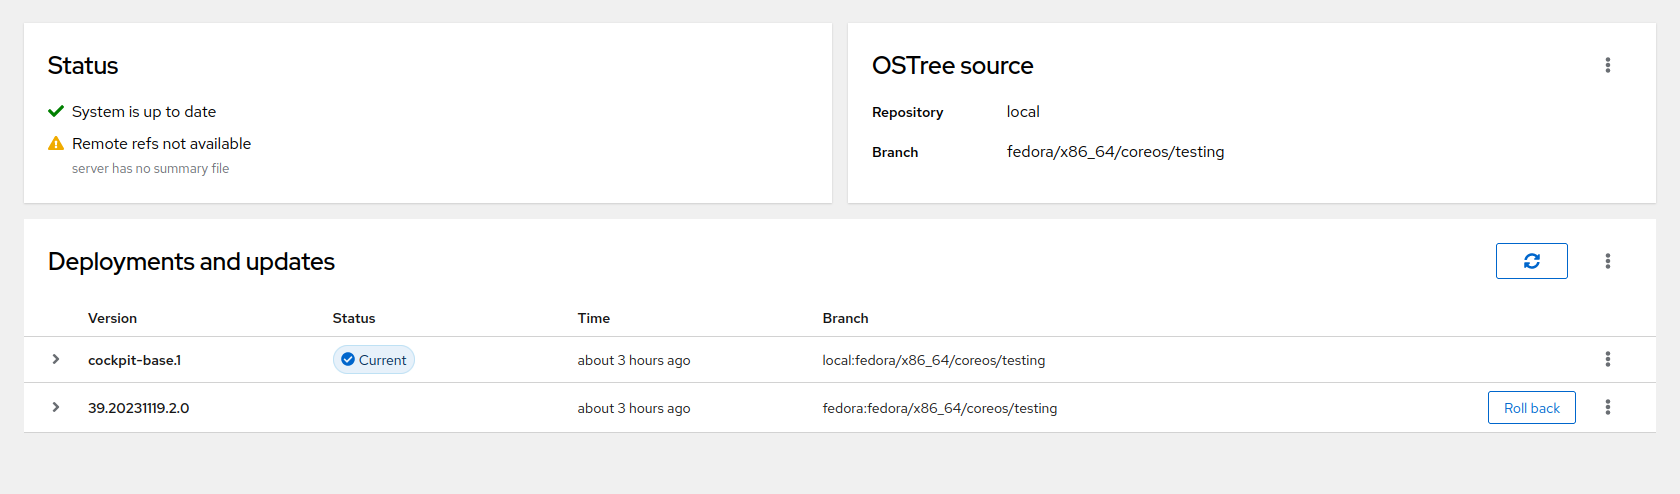 new design of the OSTree page, showing off the status card